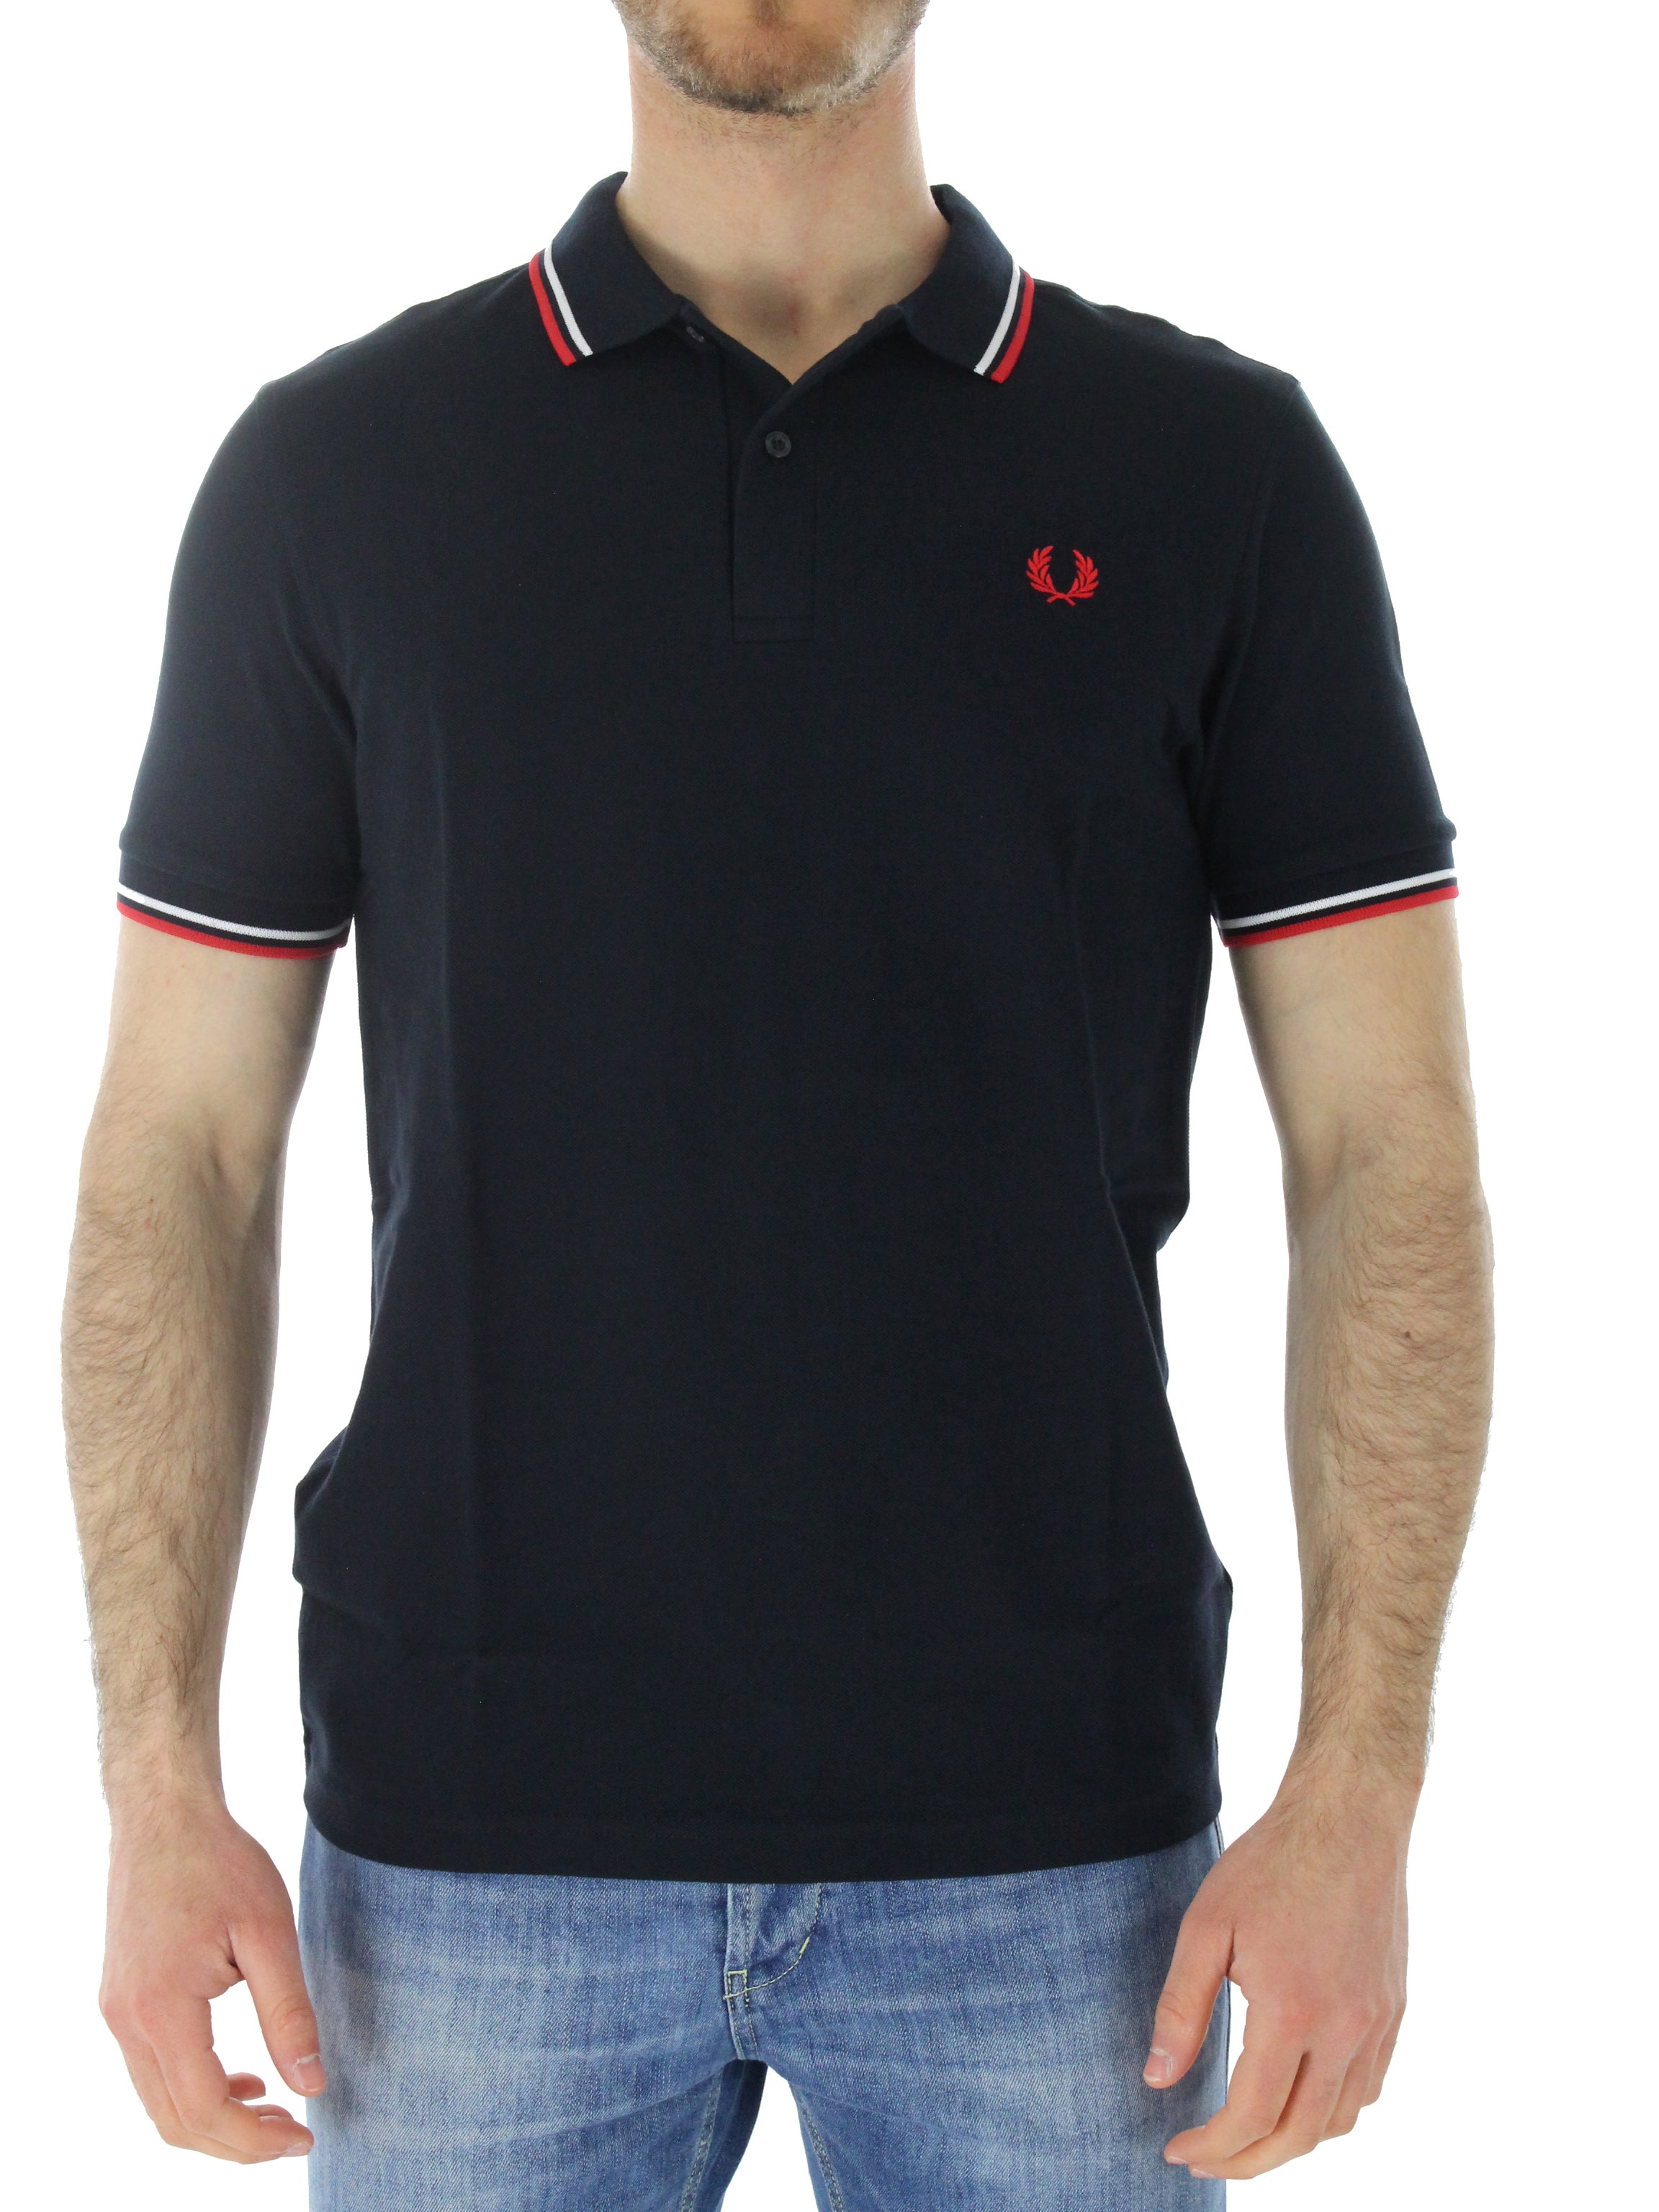 Fred perry polo righino